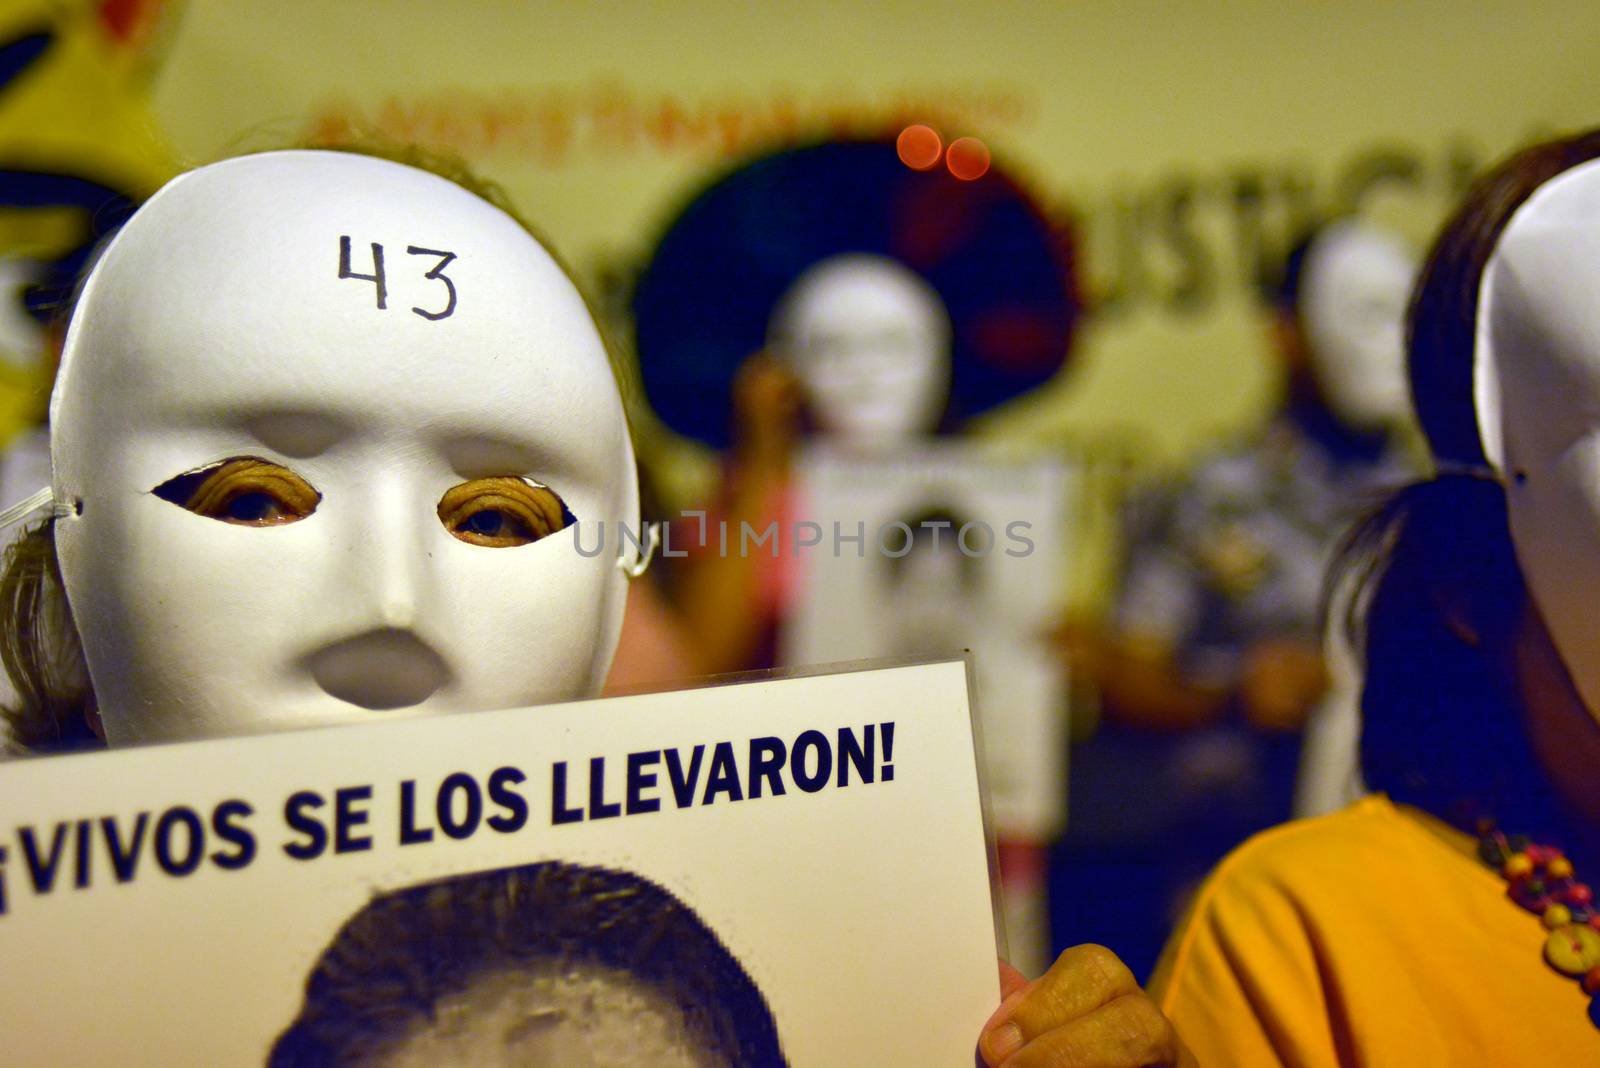 SPAIN, Madrid: A protester wearing a white mask attends a rally outside the Embassy of Mexico in Madrid, Spain on September 25, 2015, while holding up a sign displaying the photograph of a missing Mexican student who disappeared in Iguala, Mexico on September 26 last year. Forty-six students who attended Ayotzinapa Rural Teachers' College went missing with the circumstances surrounding their disappearance still unclear